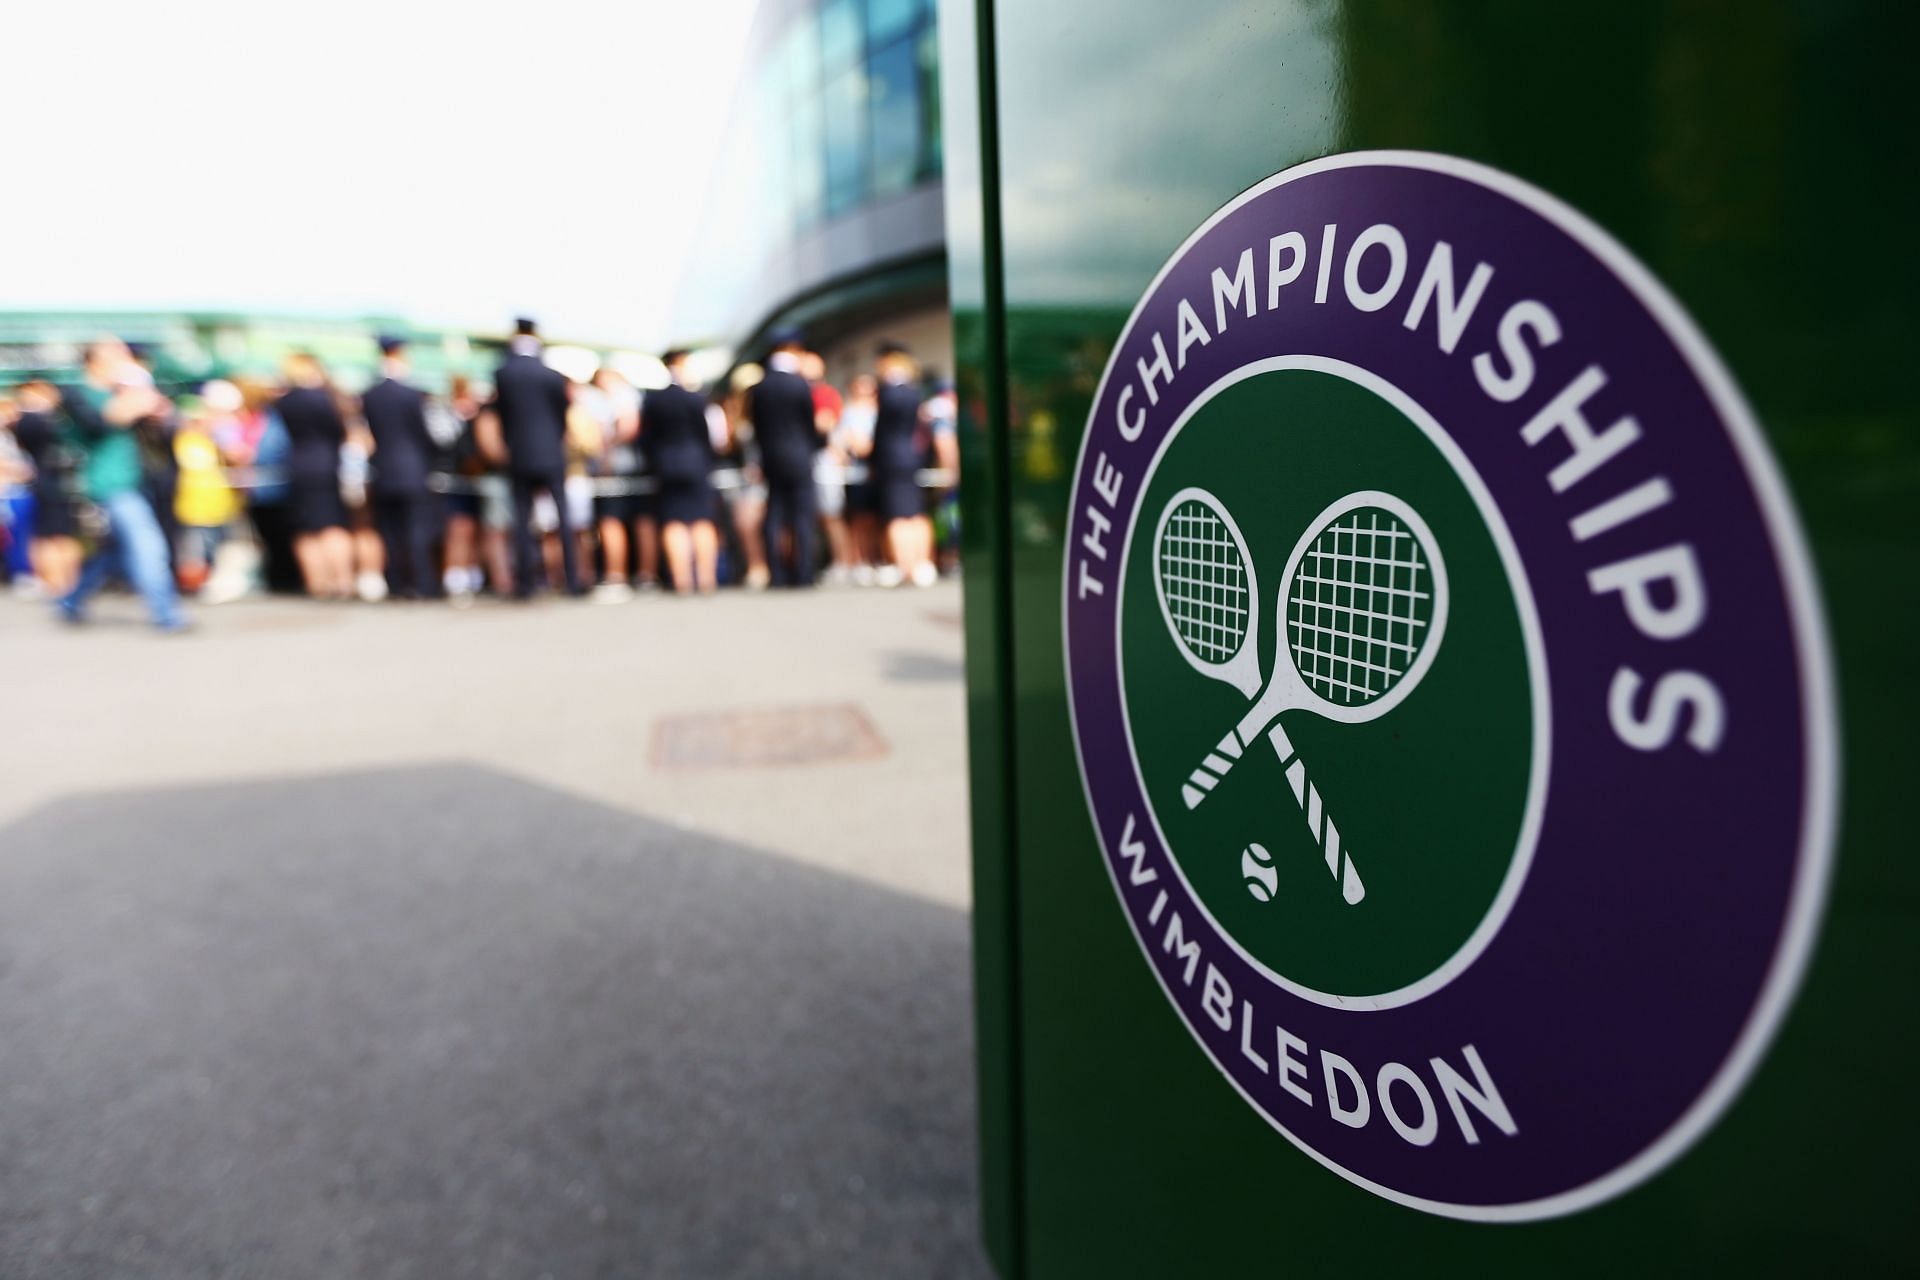 Day One: The Championships - Wimbledon 2021